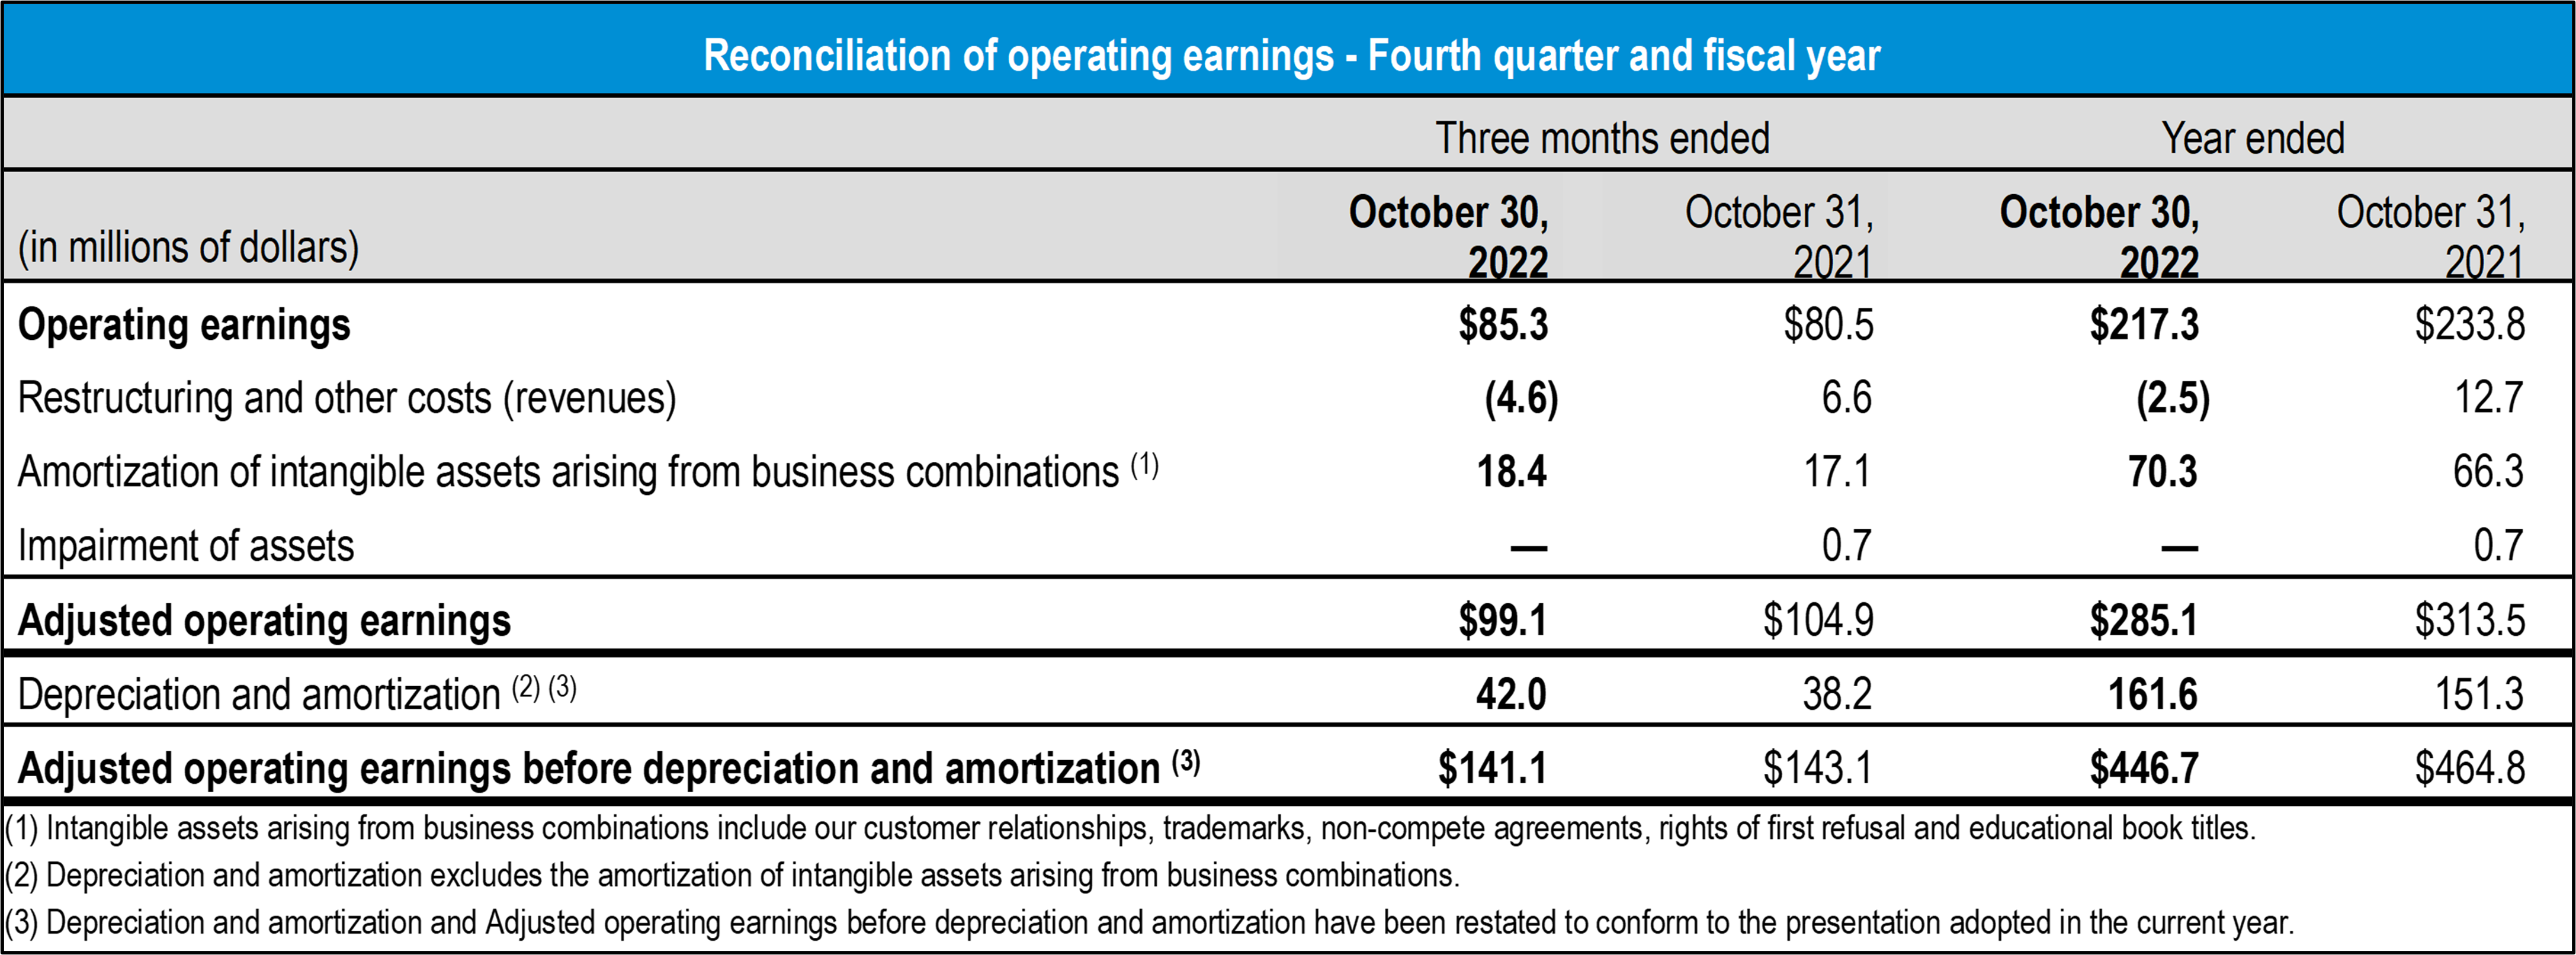 table reconciliation operating earnings Q4 and fiscal year 2022 all sectors TCL